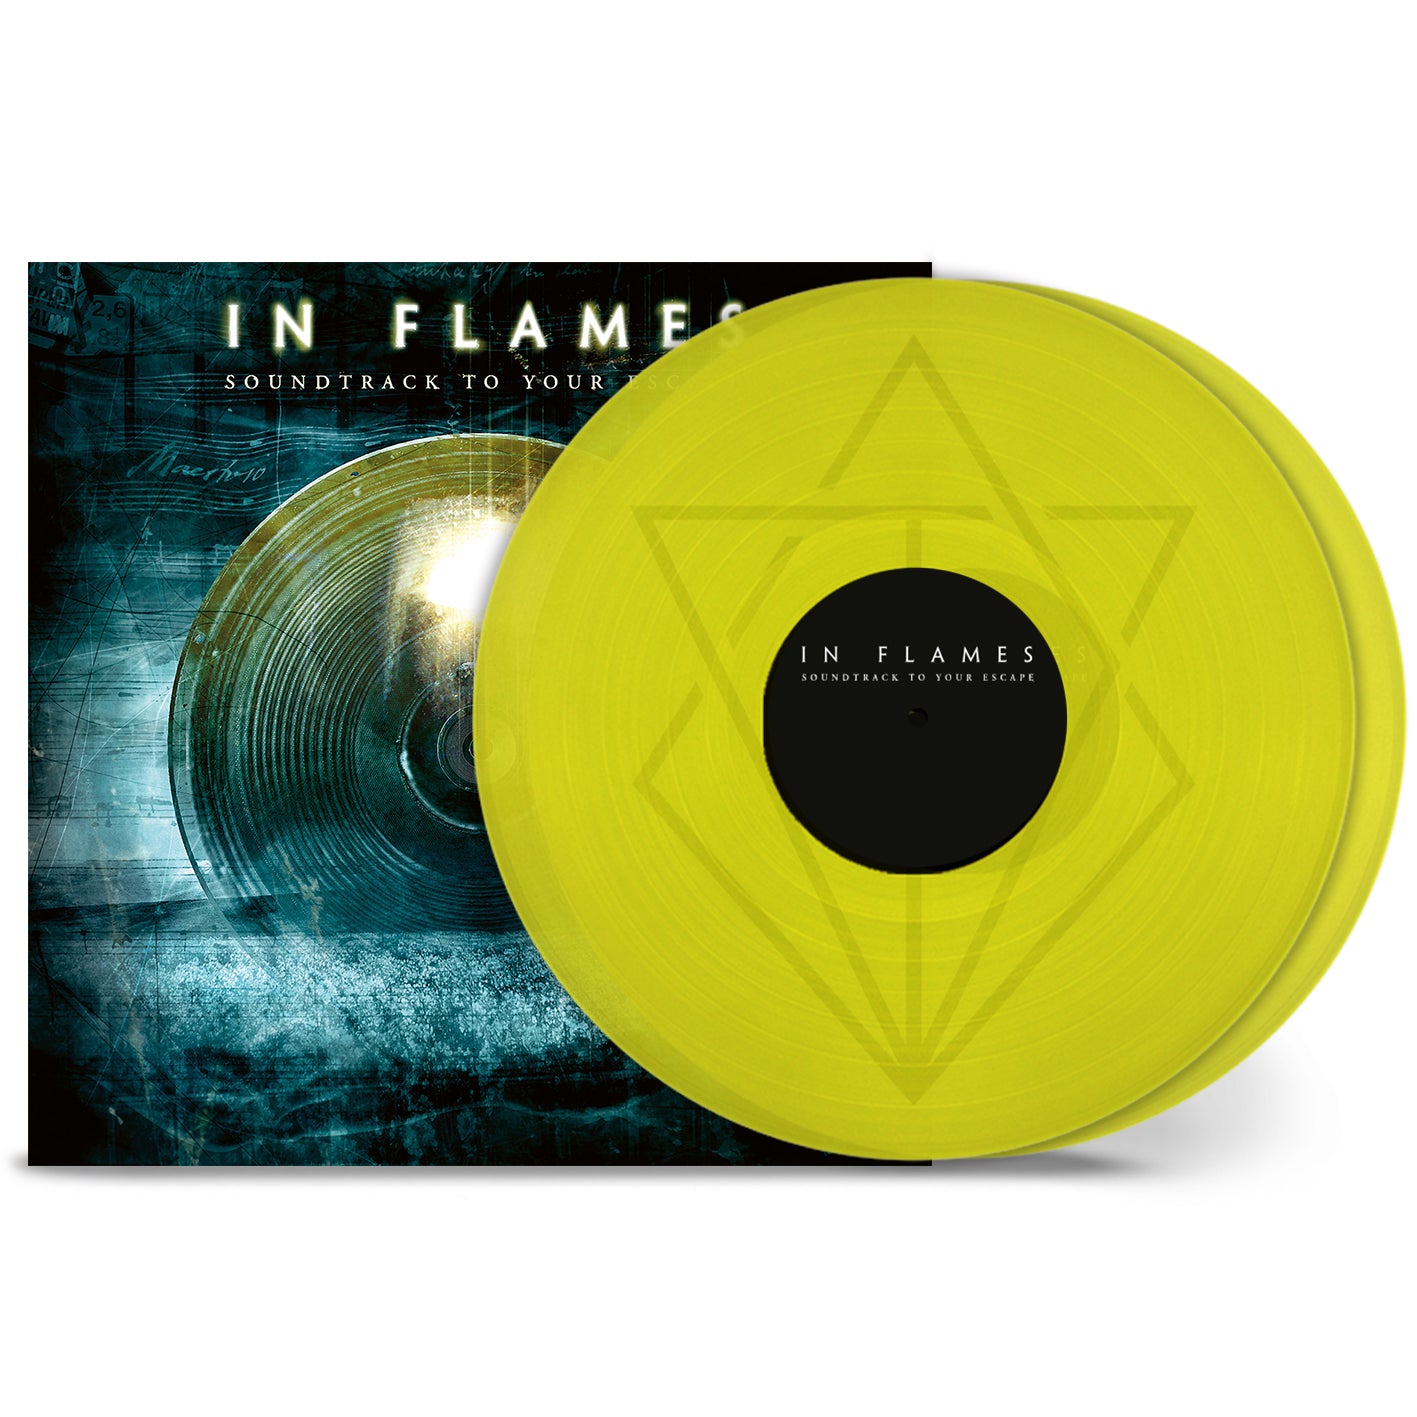 In Flames "Soundtrack To Your Escape (20th Anniversary)" 2x12" 180g Yellow Vinyl - PRE-ORDER